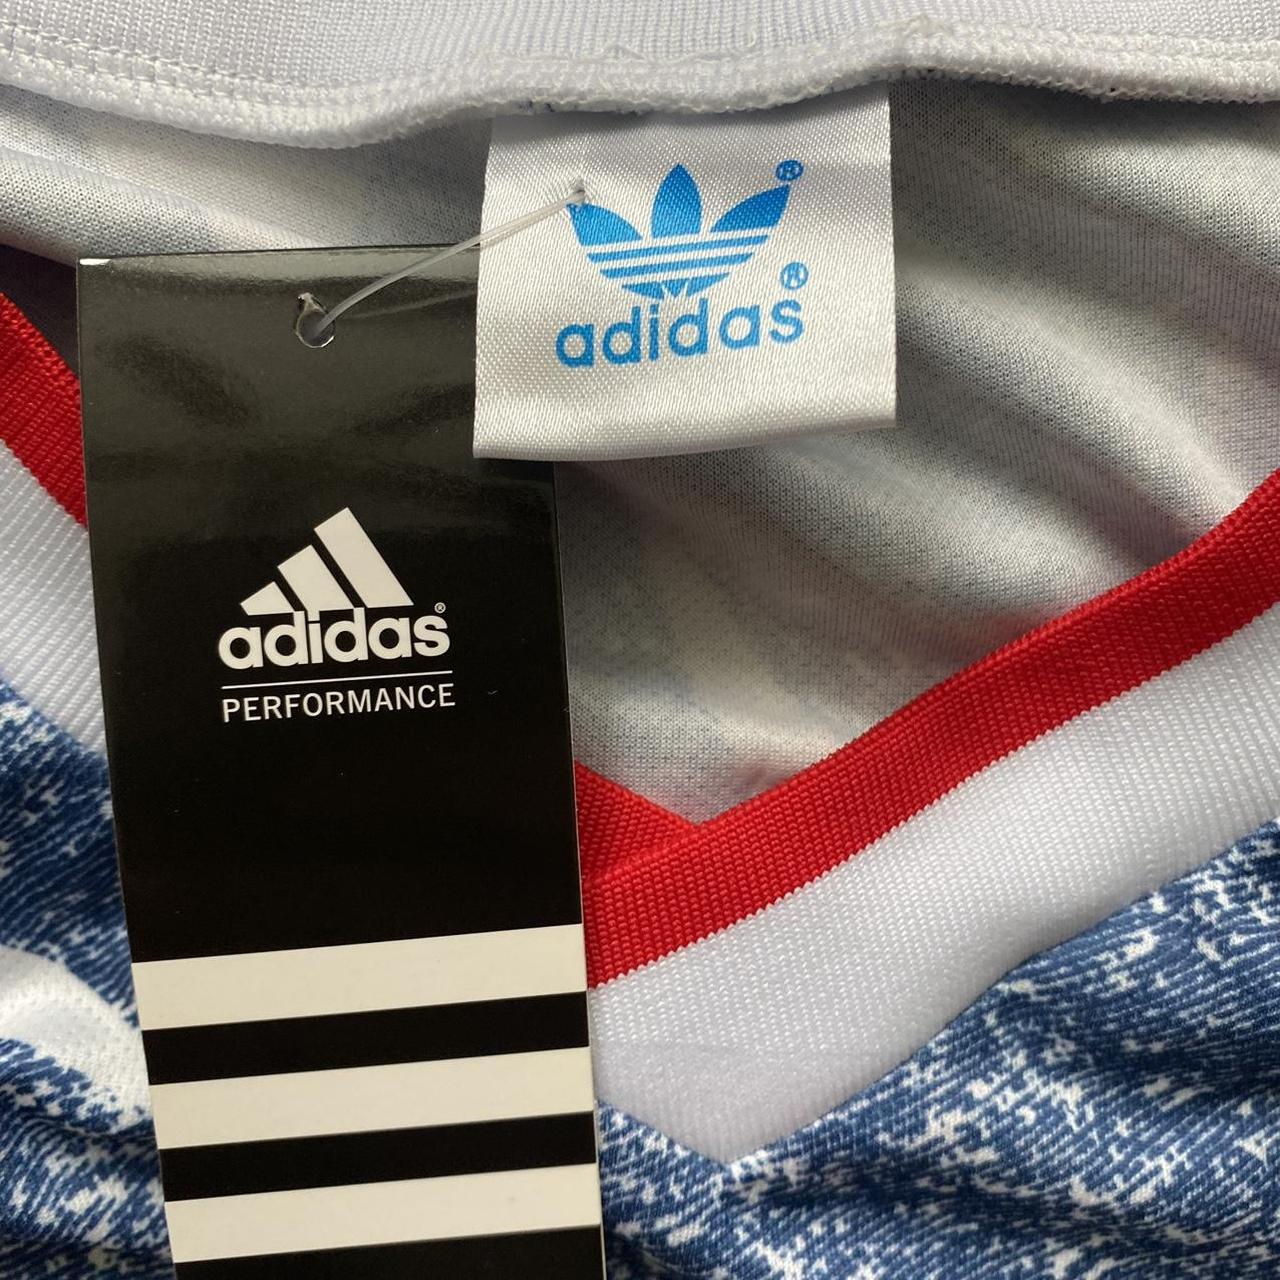 Adidas Men's Blue and White T-shirt (3)